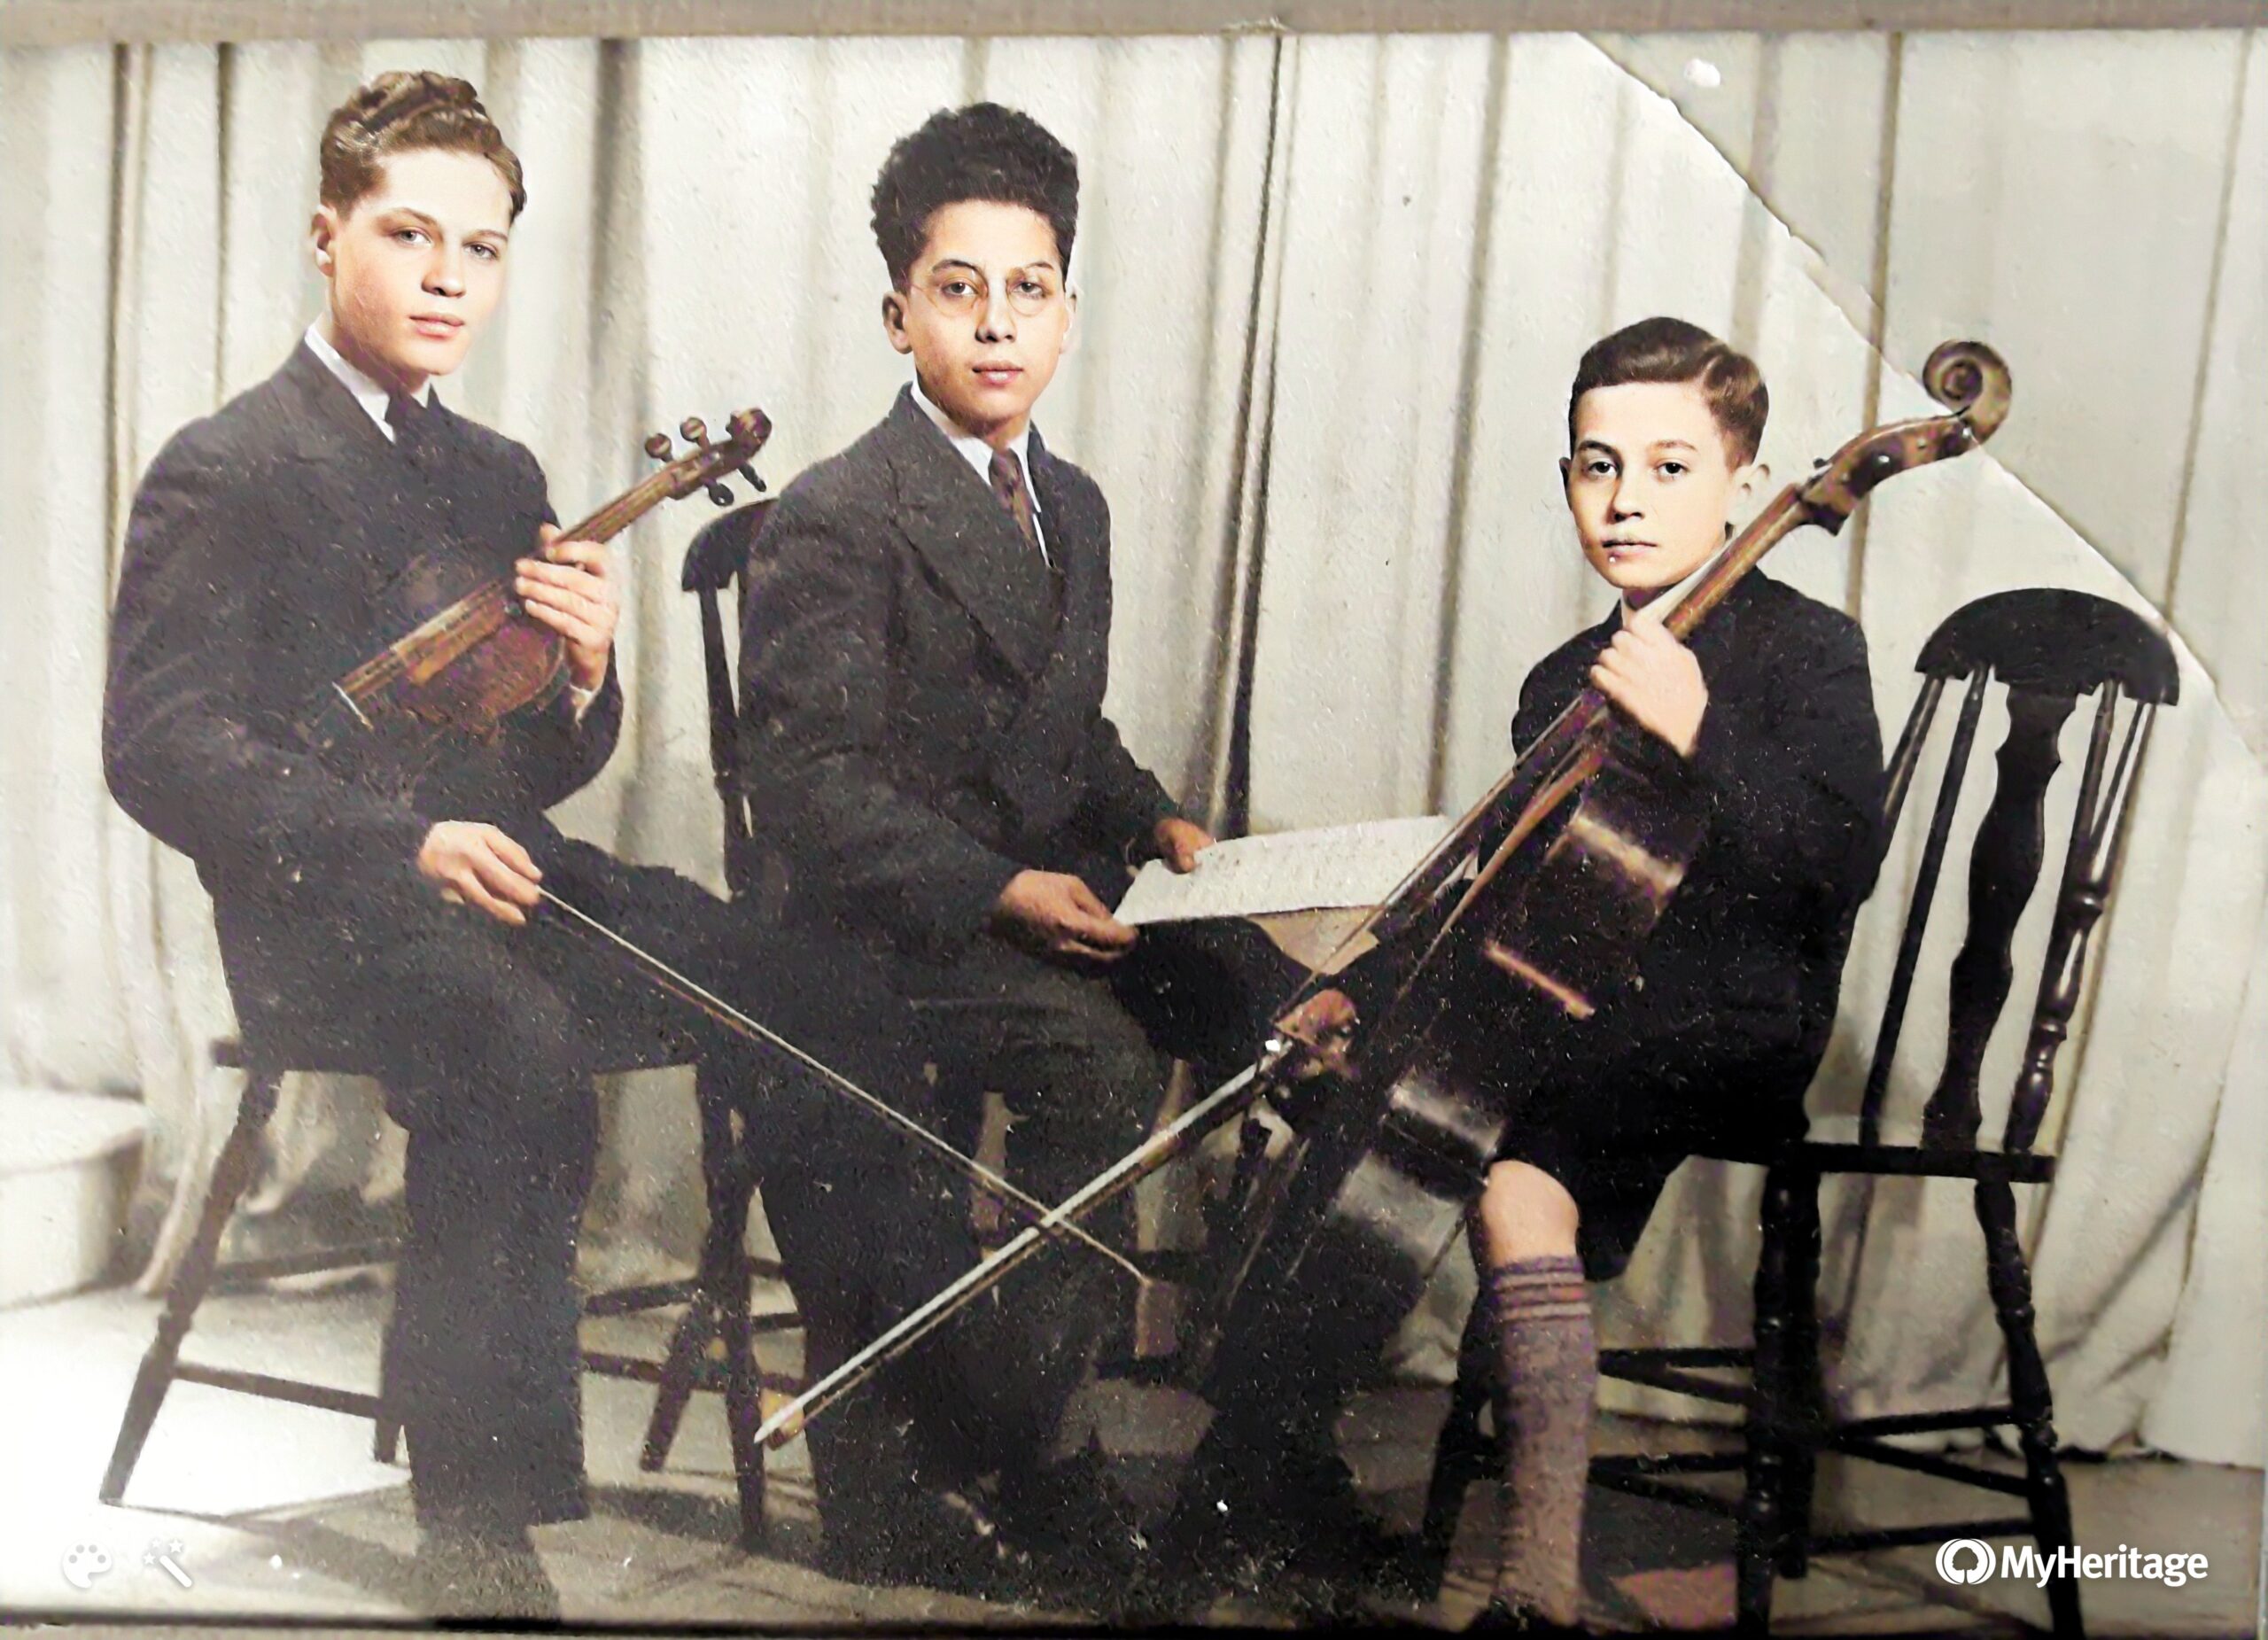 Three boys in dark suits seated before a white curtain. The boy on the left holds a violin, the boy in the center sheet music, the boy on the right a cello.